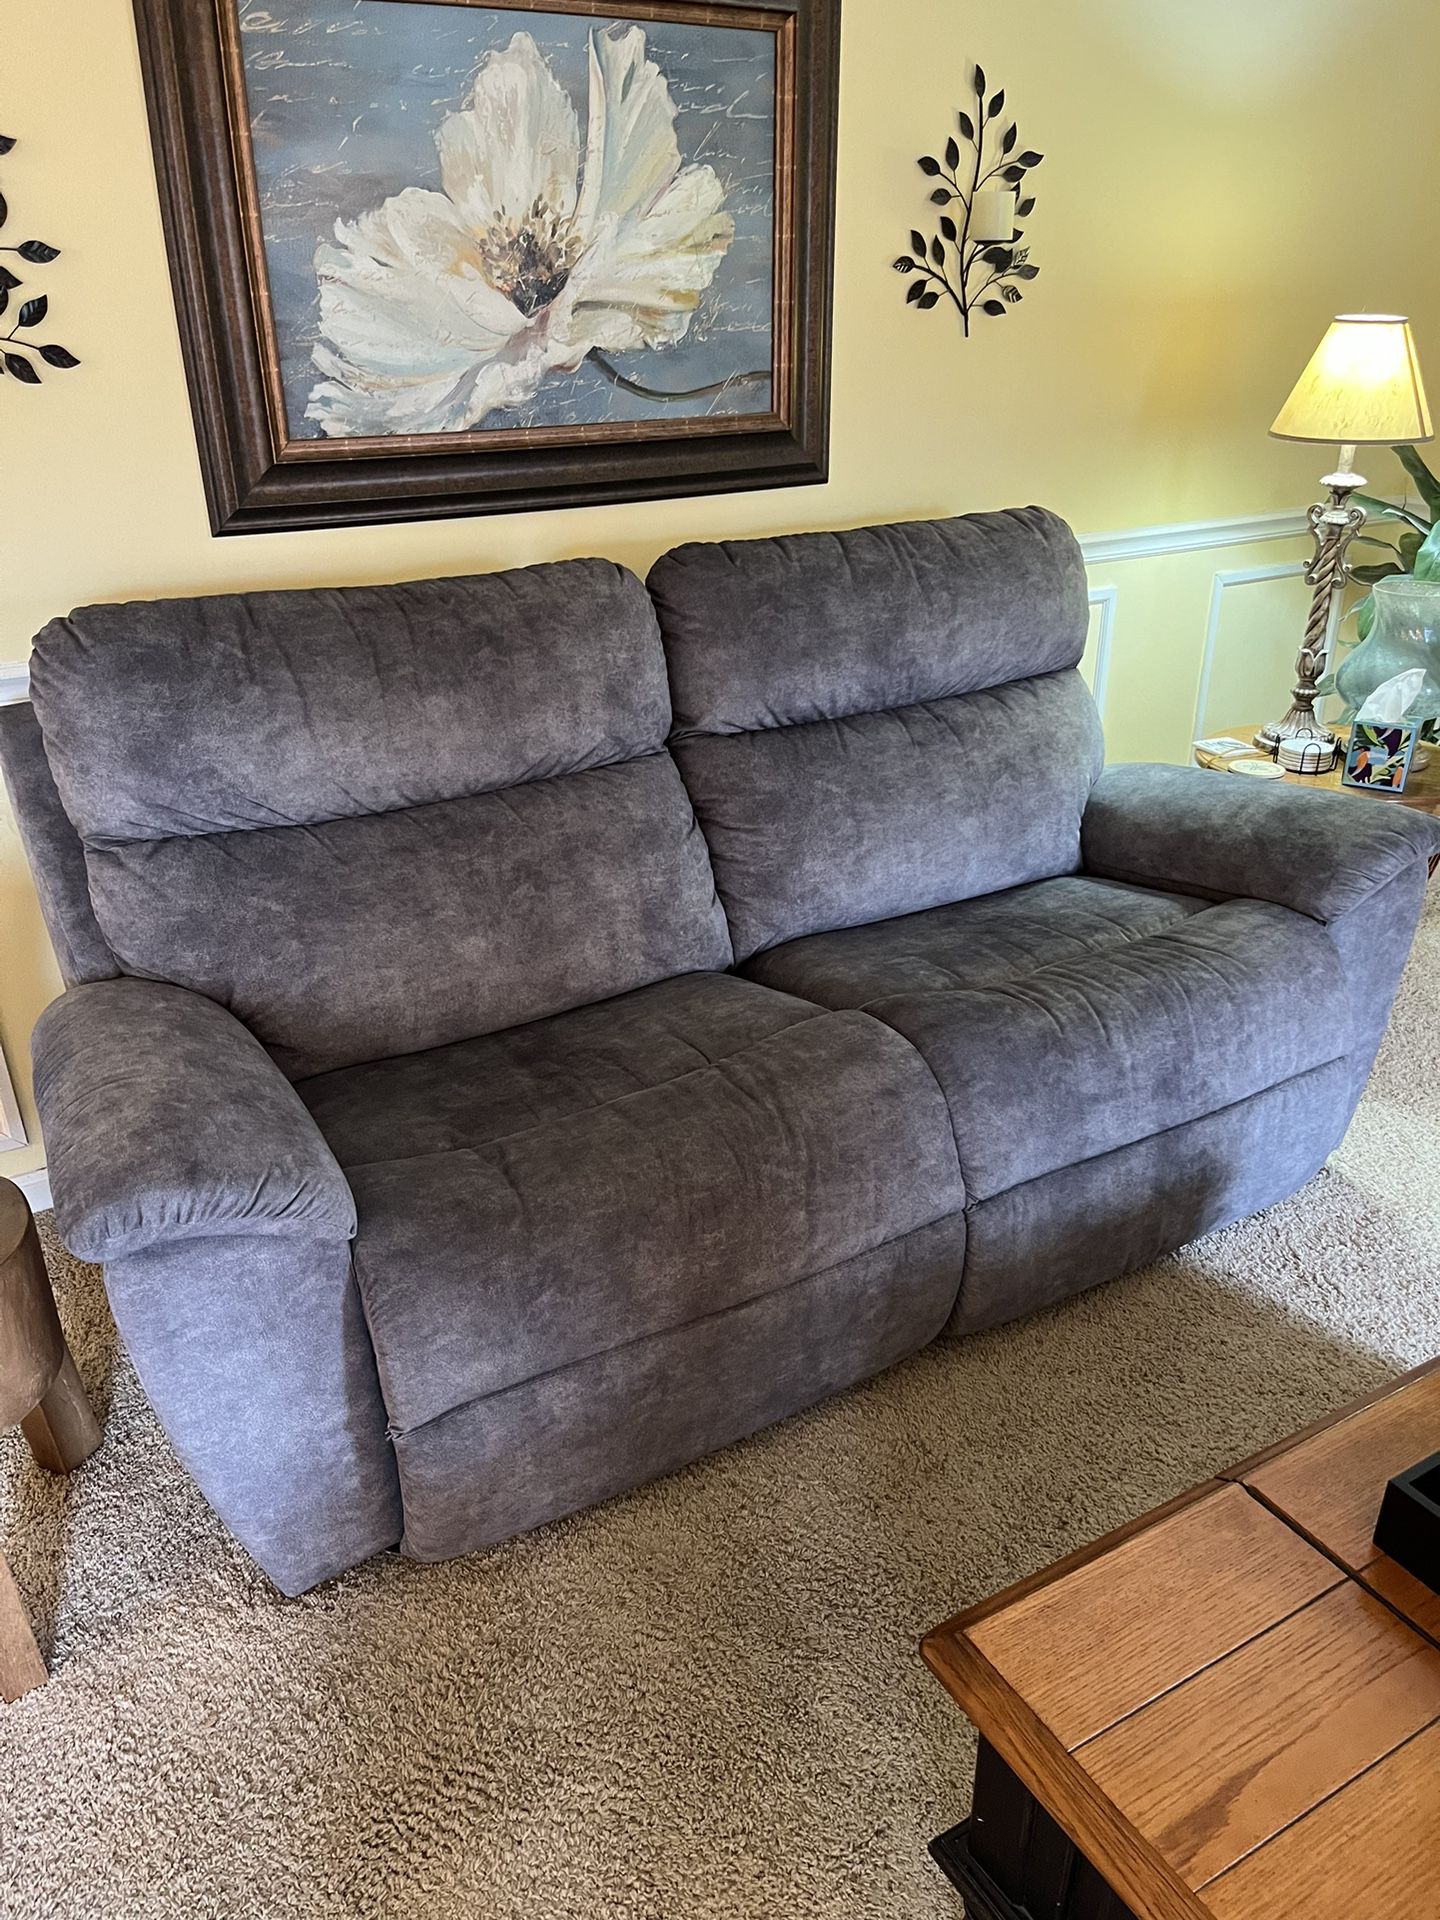 2 Motorized Reclining Couches